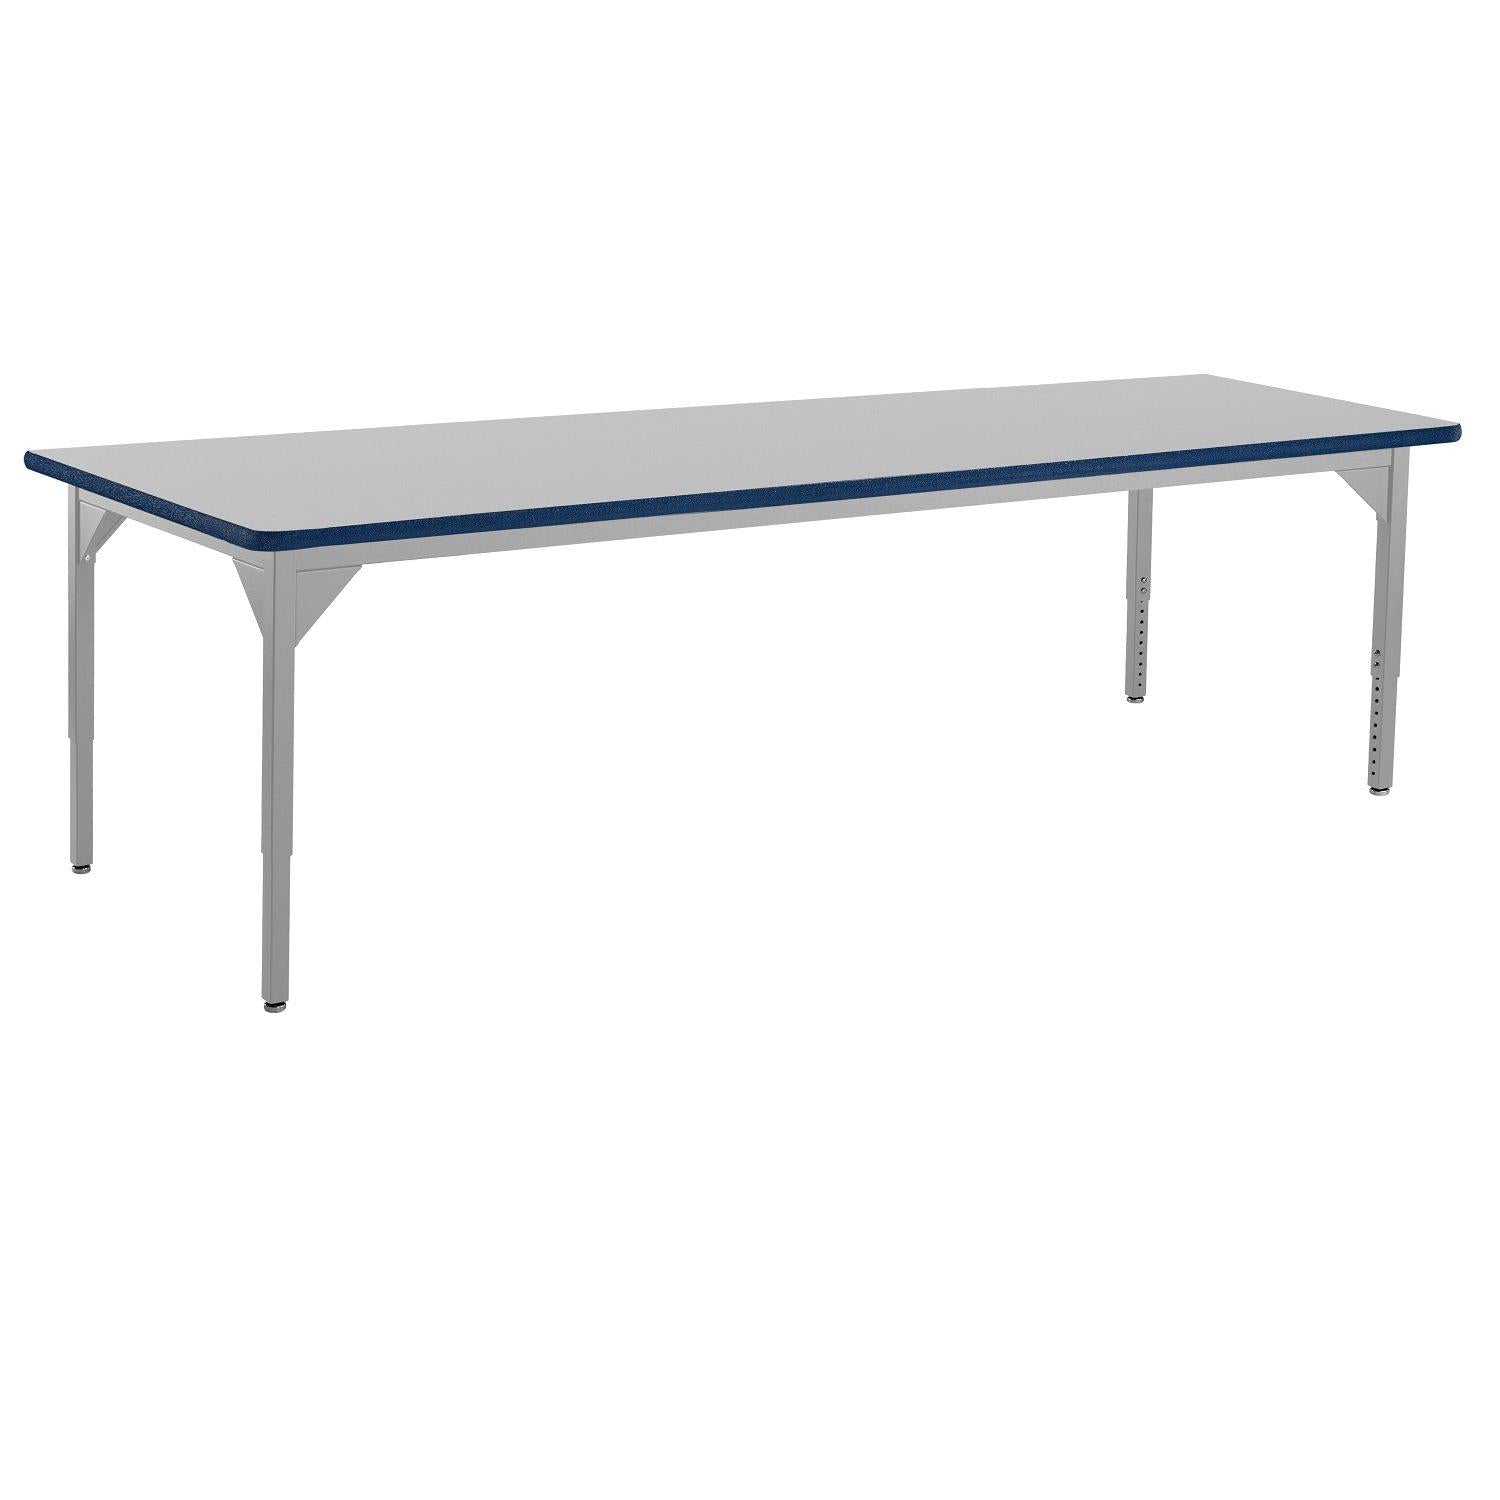 Heavy-Duty Height-Adjustable Utility Table, Soft Grey Frame, 48" x 96", Supreme High-Pressure Laminate Top with Black ProtectEdge